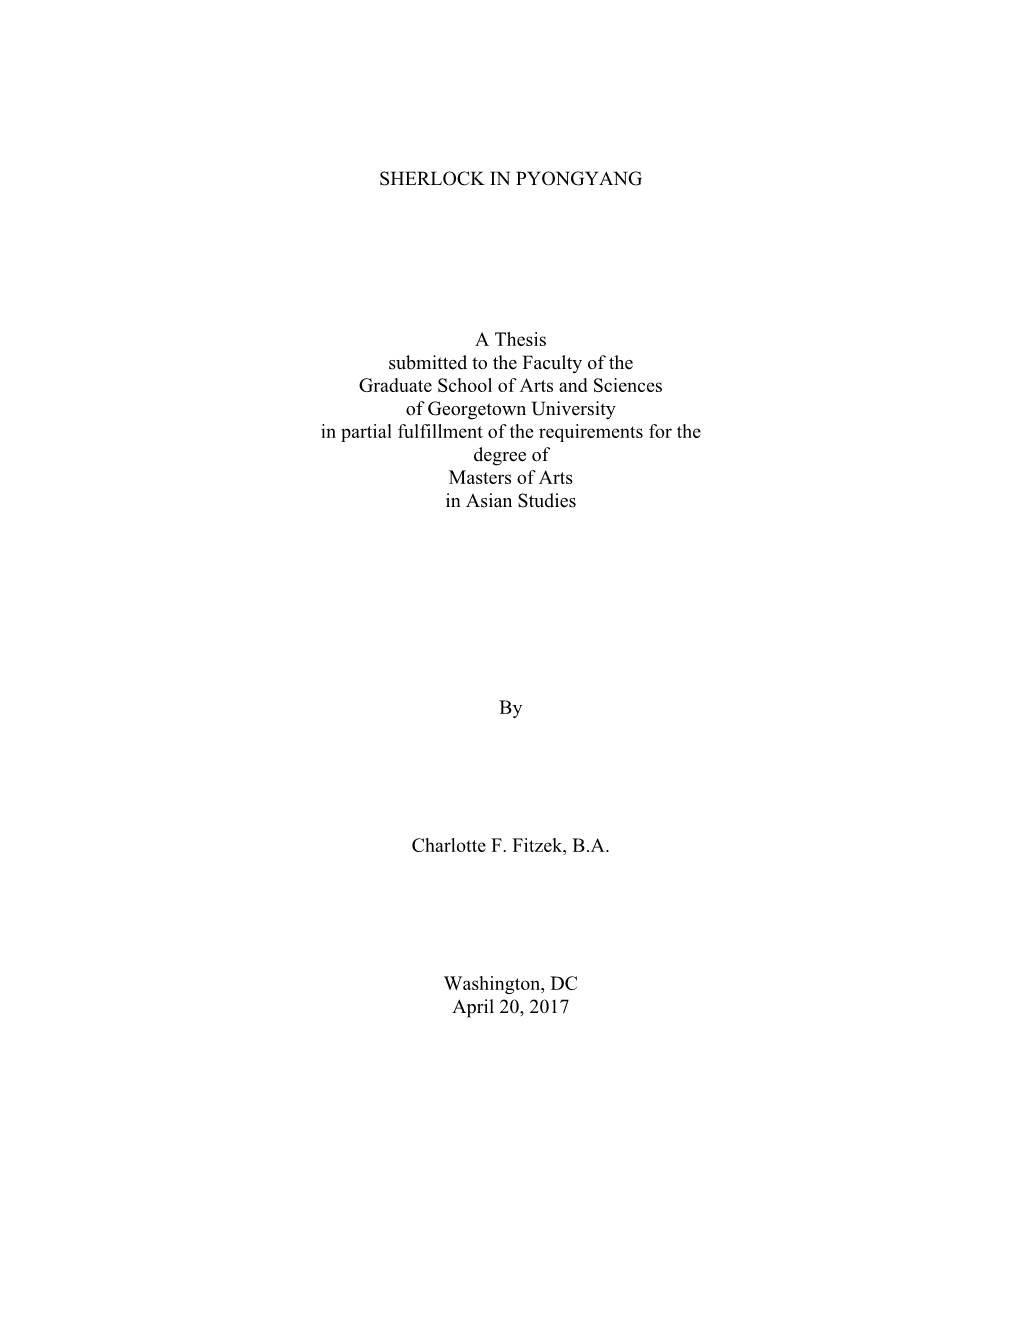 SHERLOCK in PYONGYANG a Thesis Submitted to the Faculty Of